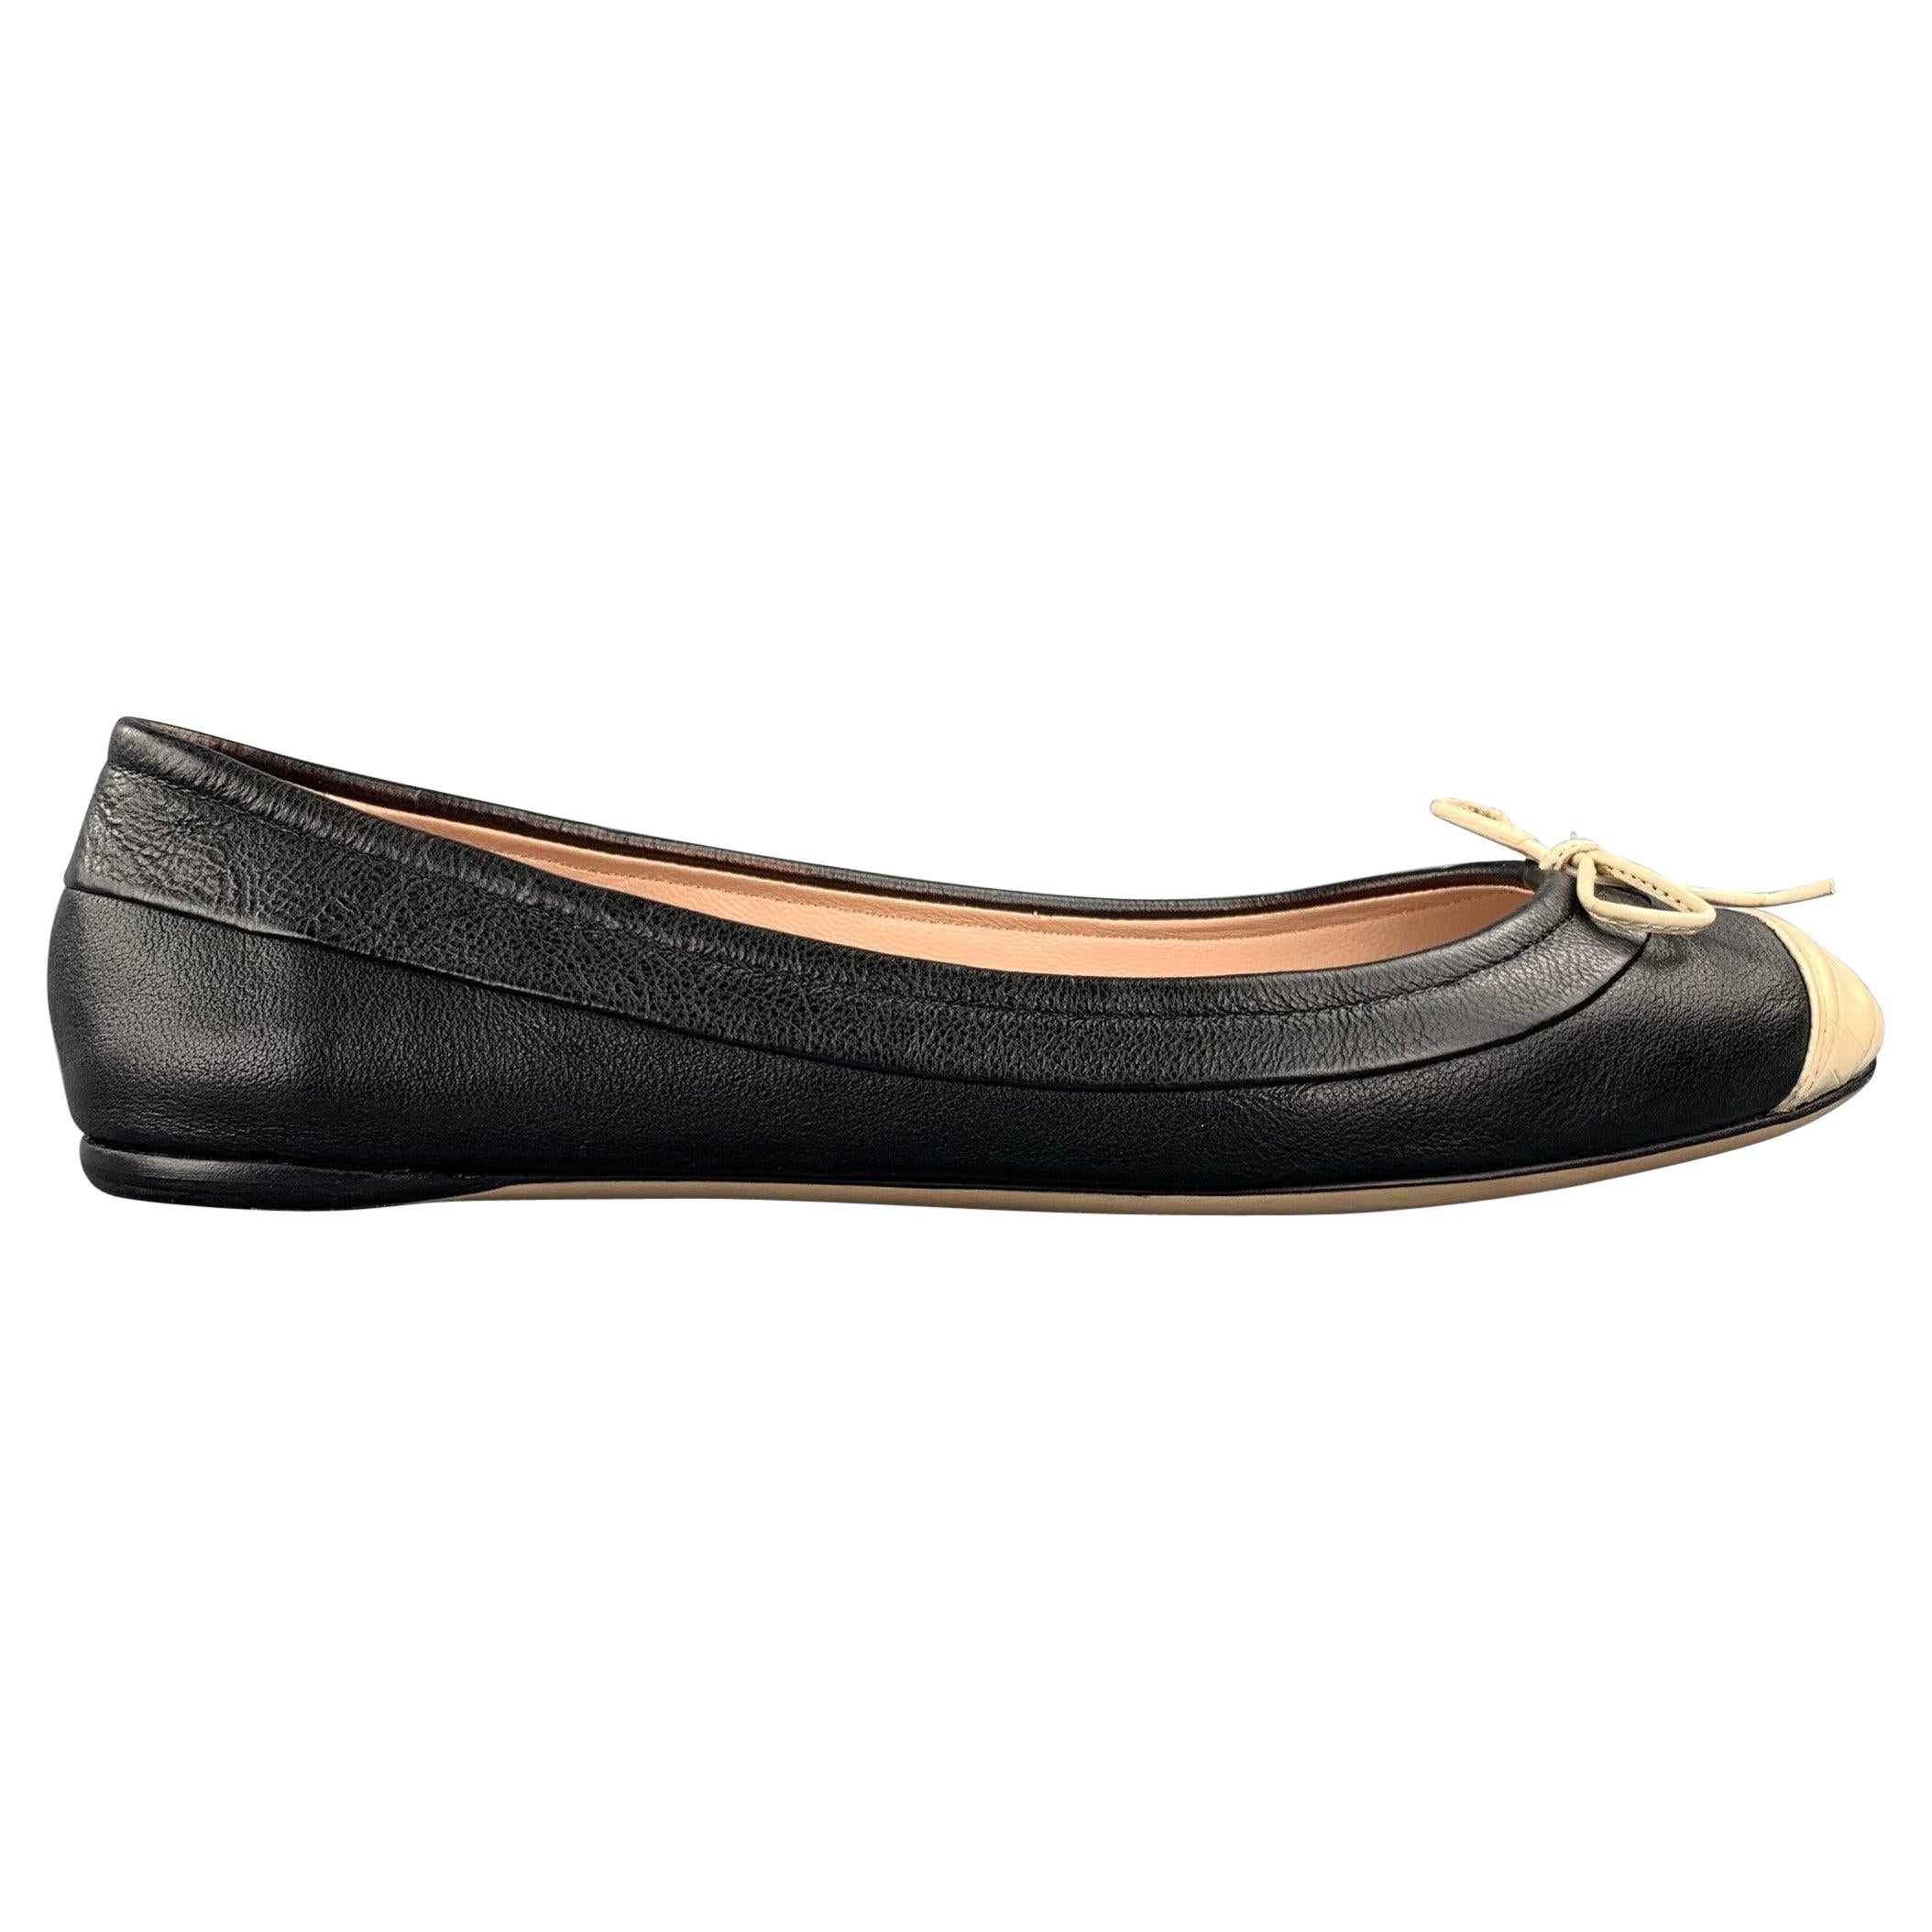 REED KRAKOFF Size 7.5 Black & Beige Two Tone Leather Cap Toe Flats For Sale